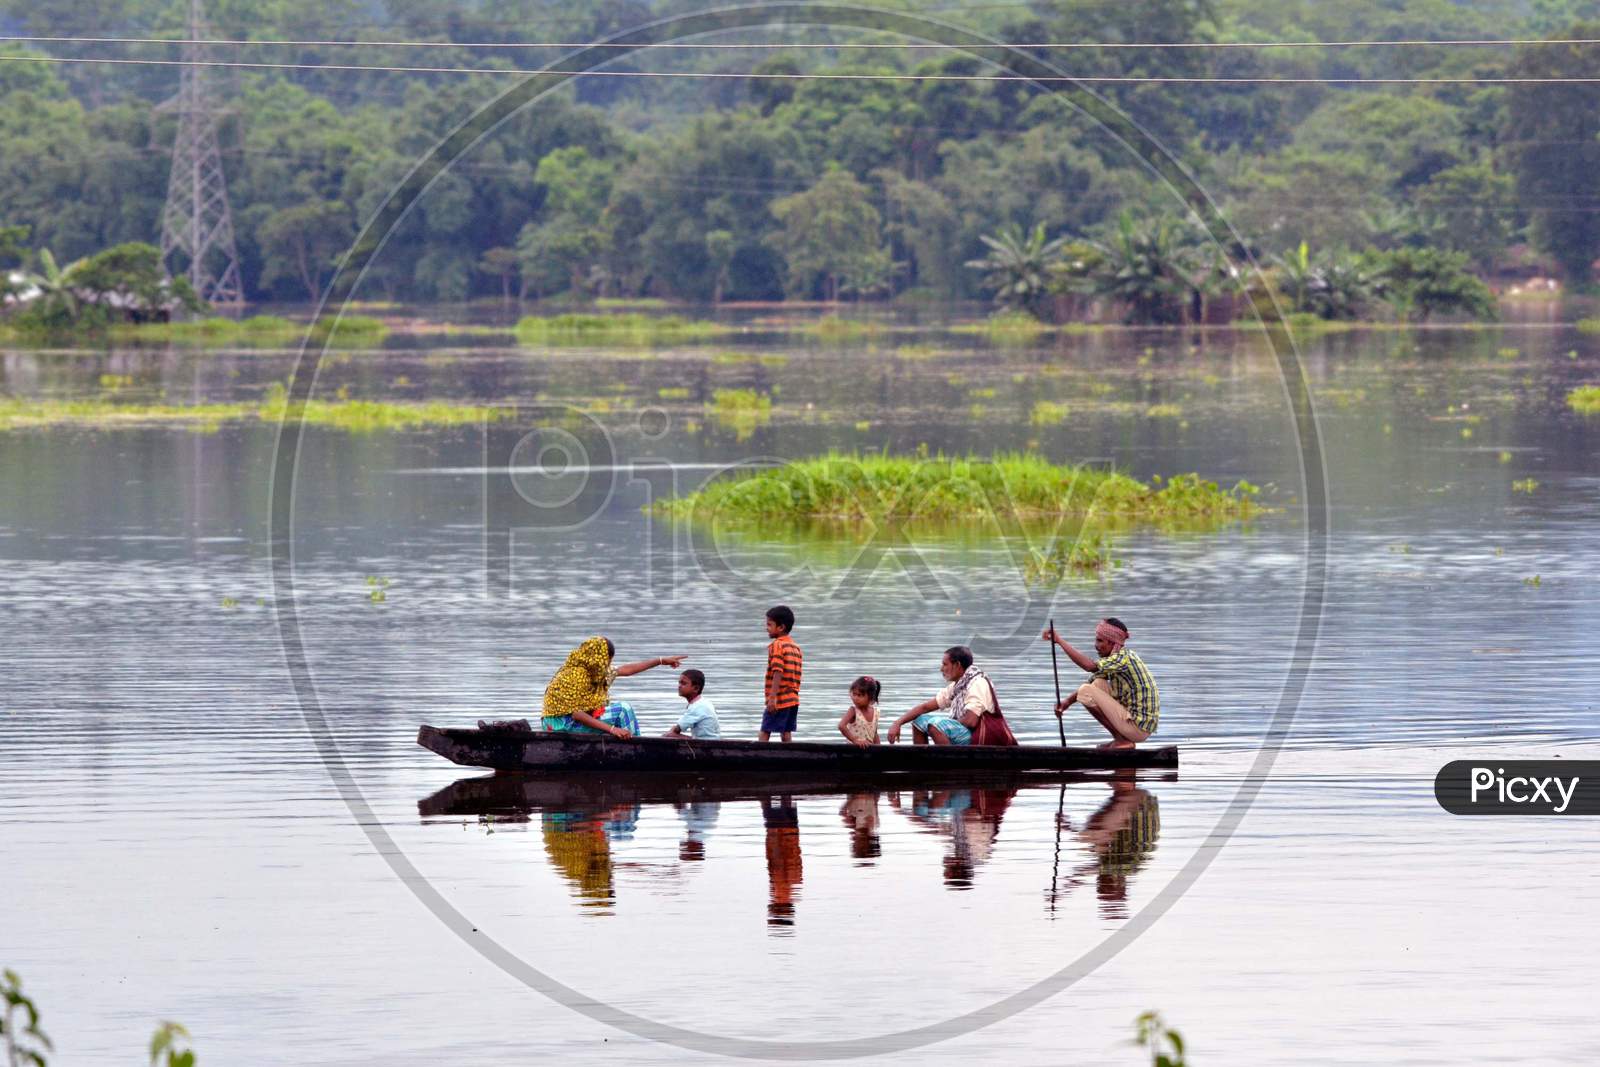 Villagers Uses A Boat Near Submerged Houses In A Village Near Kaziranga National Park In Golaghat District Of Assam On July 26,2016